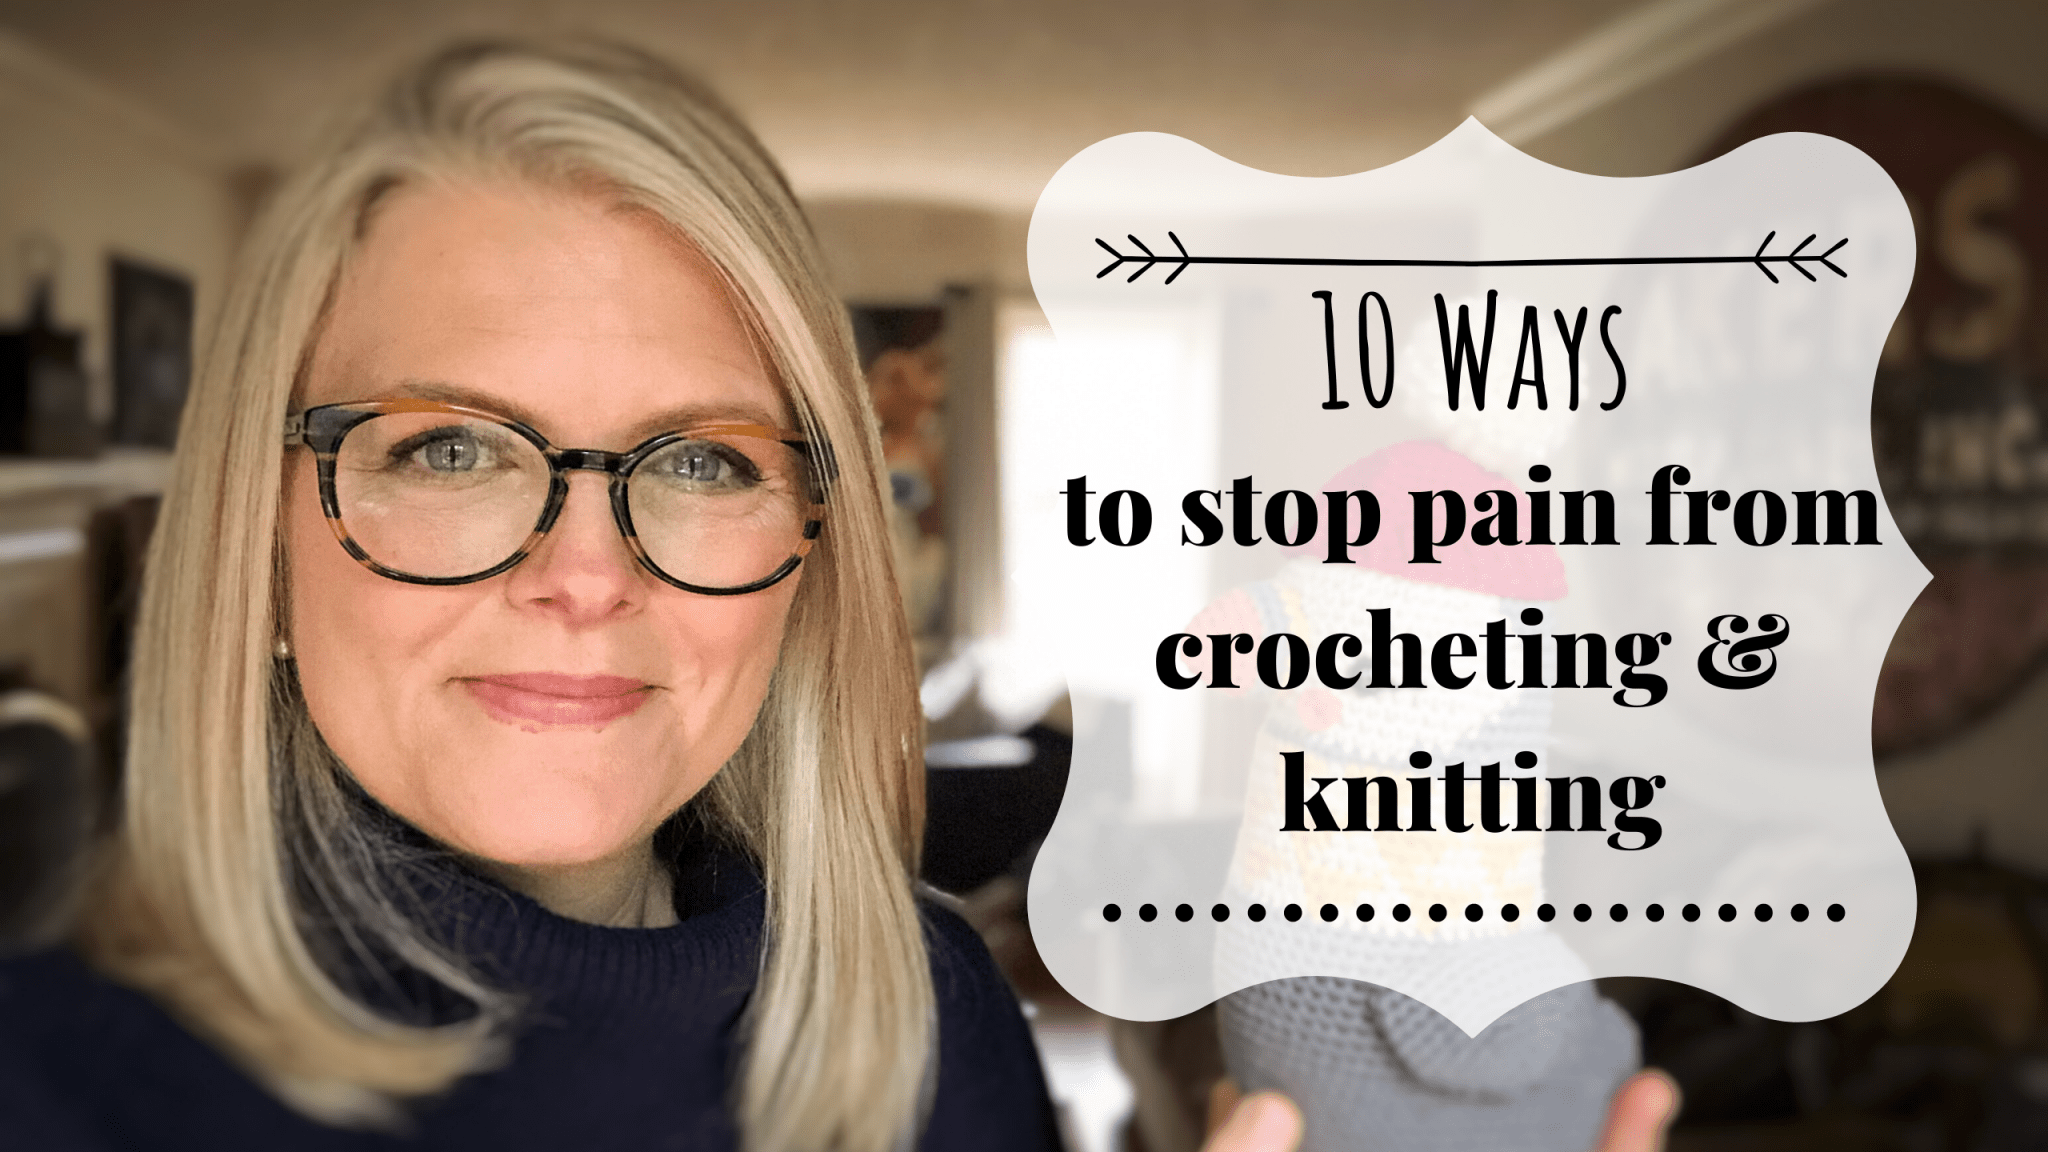 10 Ways to Stop Pain from Crocheting and Knitting